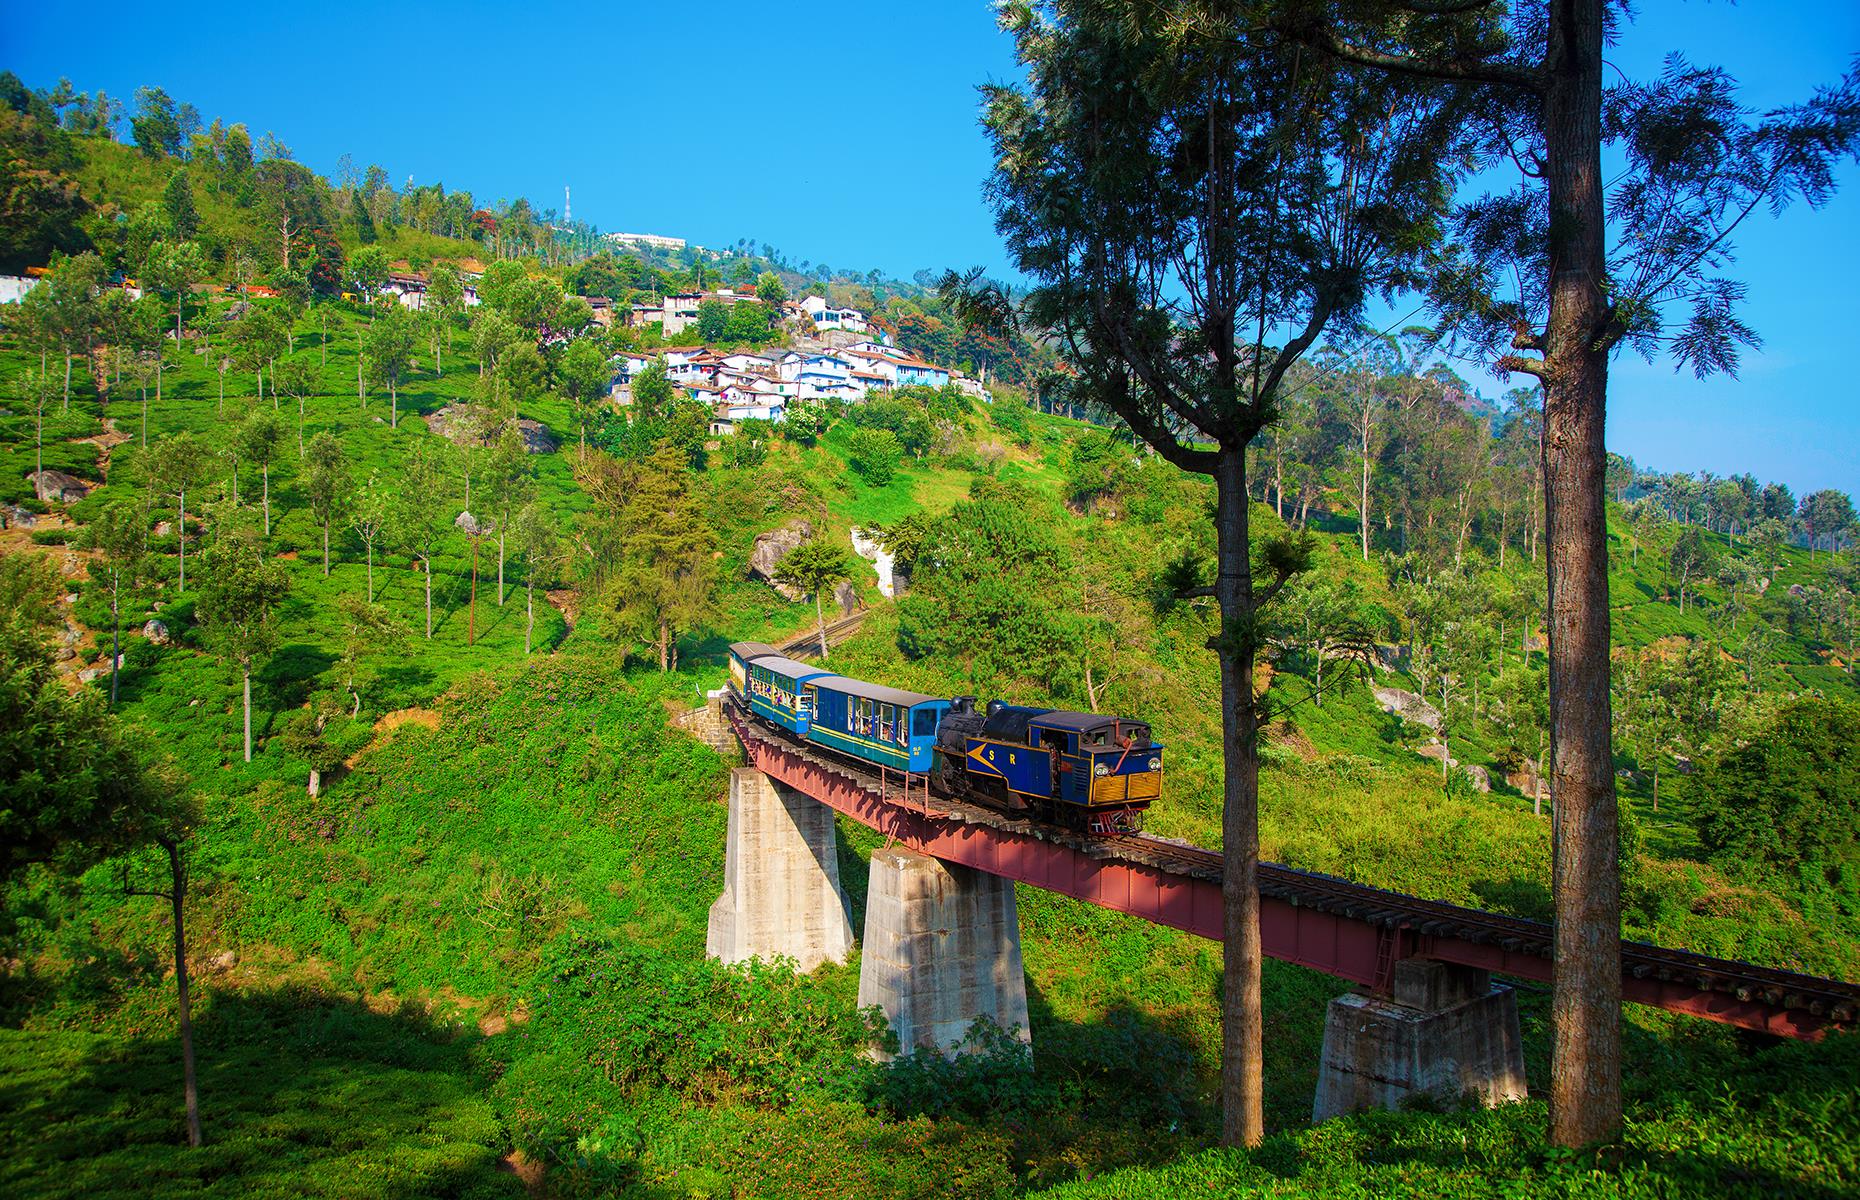 <p>India's only rack railway, the Nilgiri Mountain Railway from Mettupalayam to Udagamandalam is part of the UNESCO-listed Mountain Railways of India but a one-way ride in sleeper class won't cost you more than £2 ($2.40). The train climbs the mountain rather sharply – it has the steepest track in Asia with a maximum gradient of 8.33%. The route takes exactly 290 minutes to go uphill, yet the return journey is 75 minutes shorter.</p>